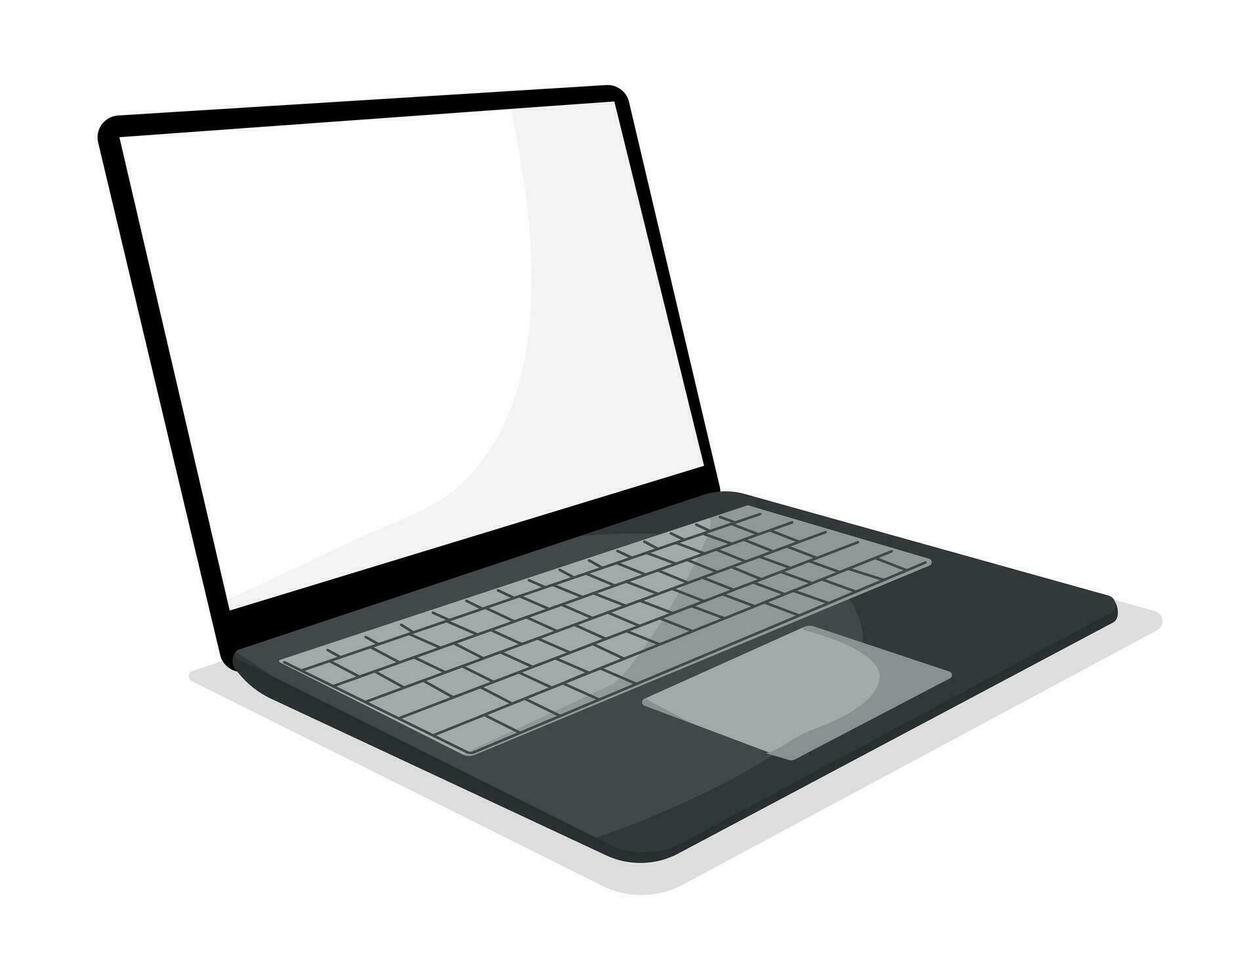 laptop computer and laptop vector